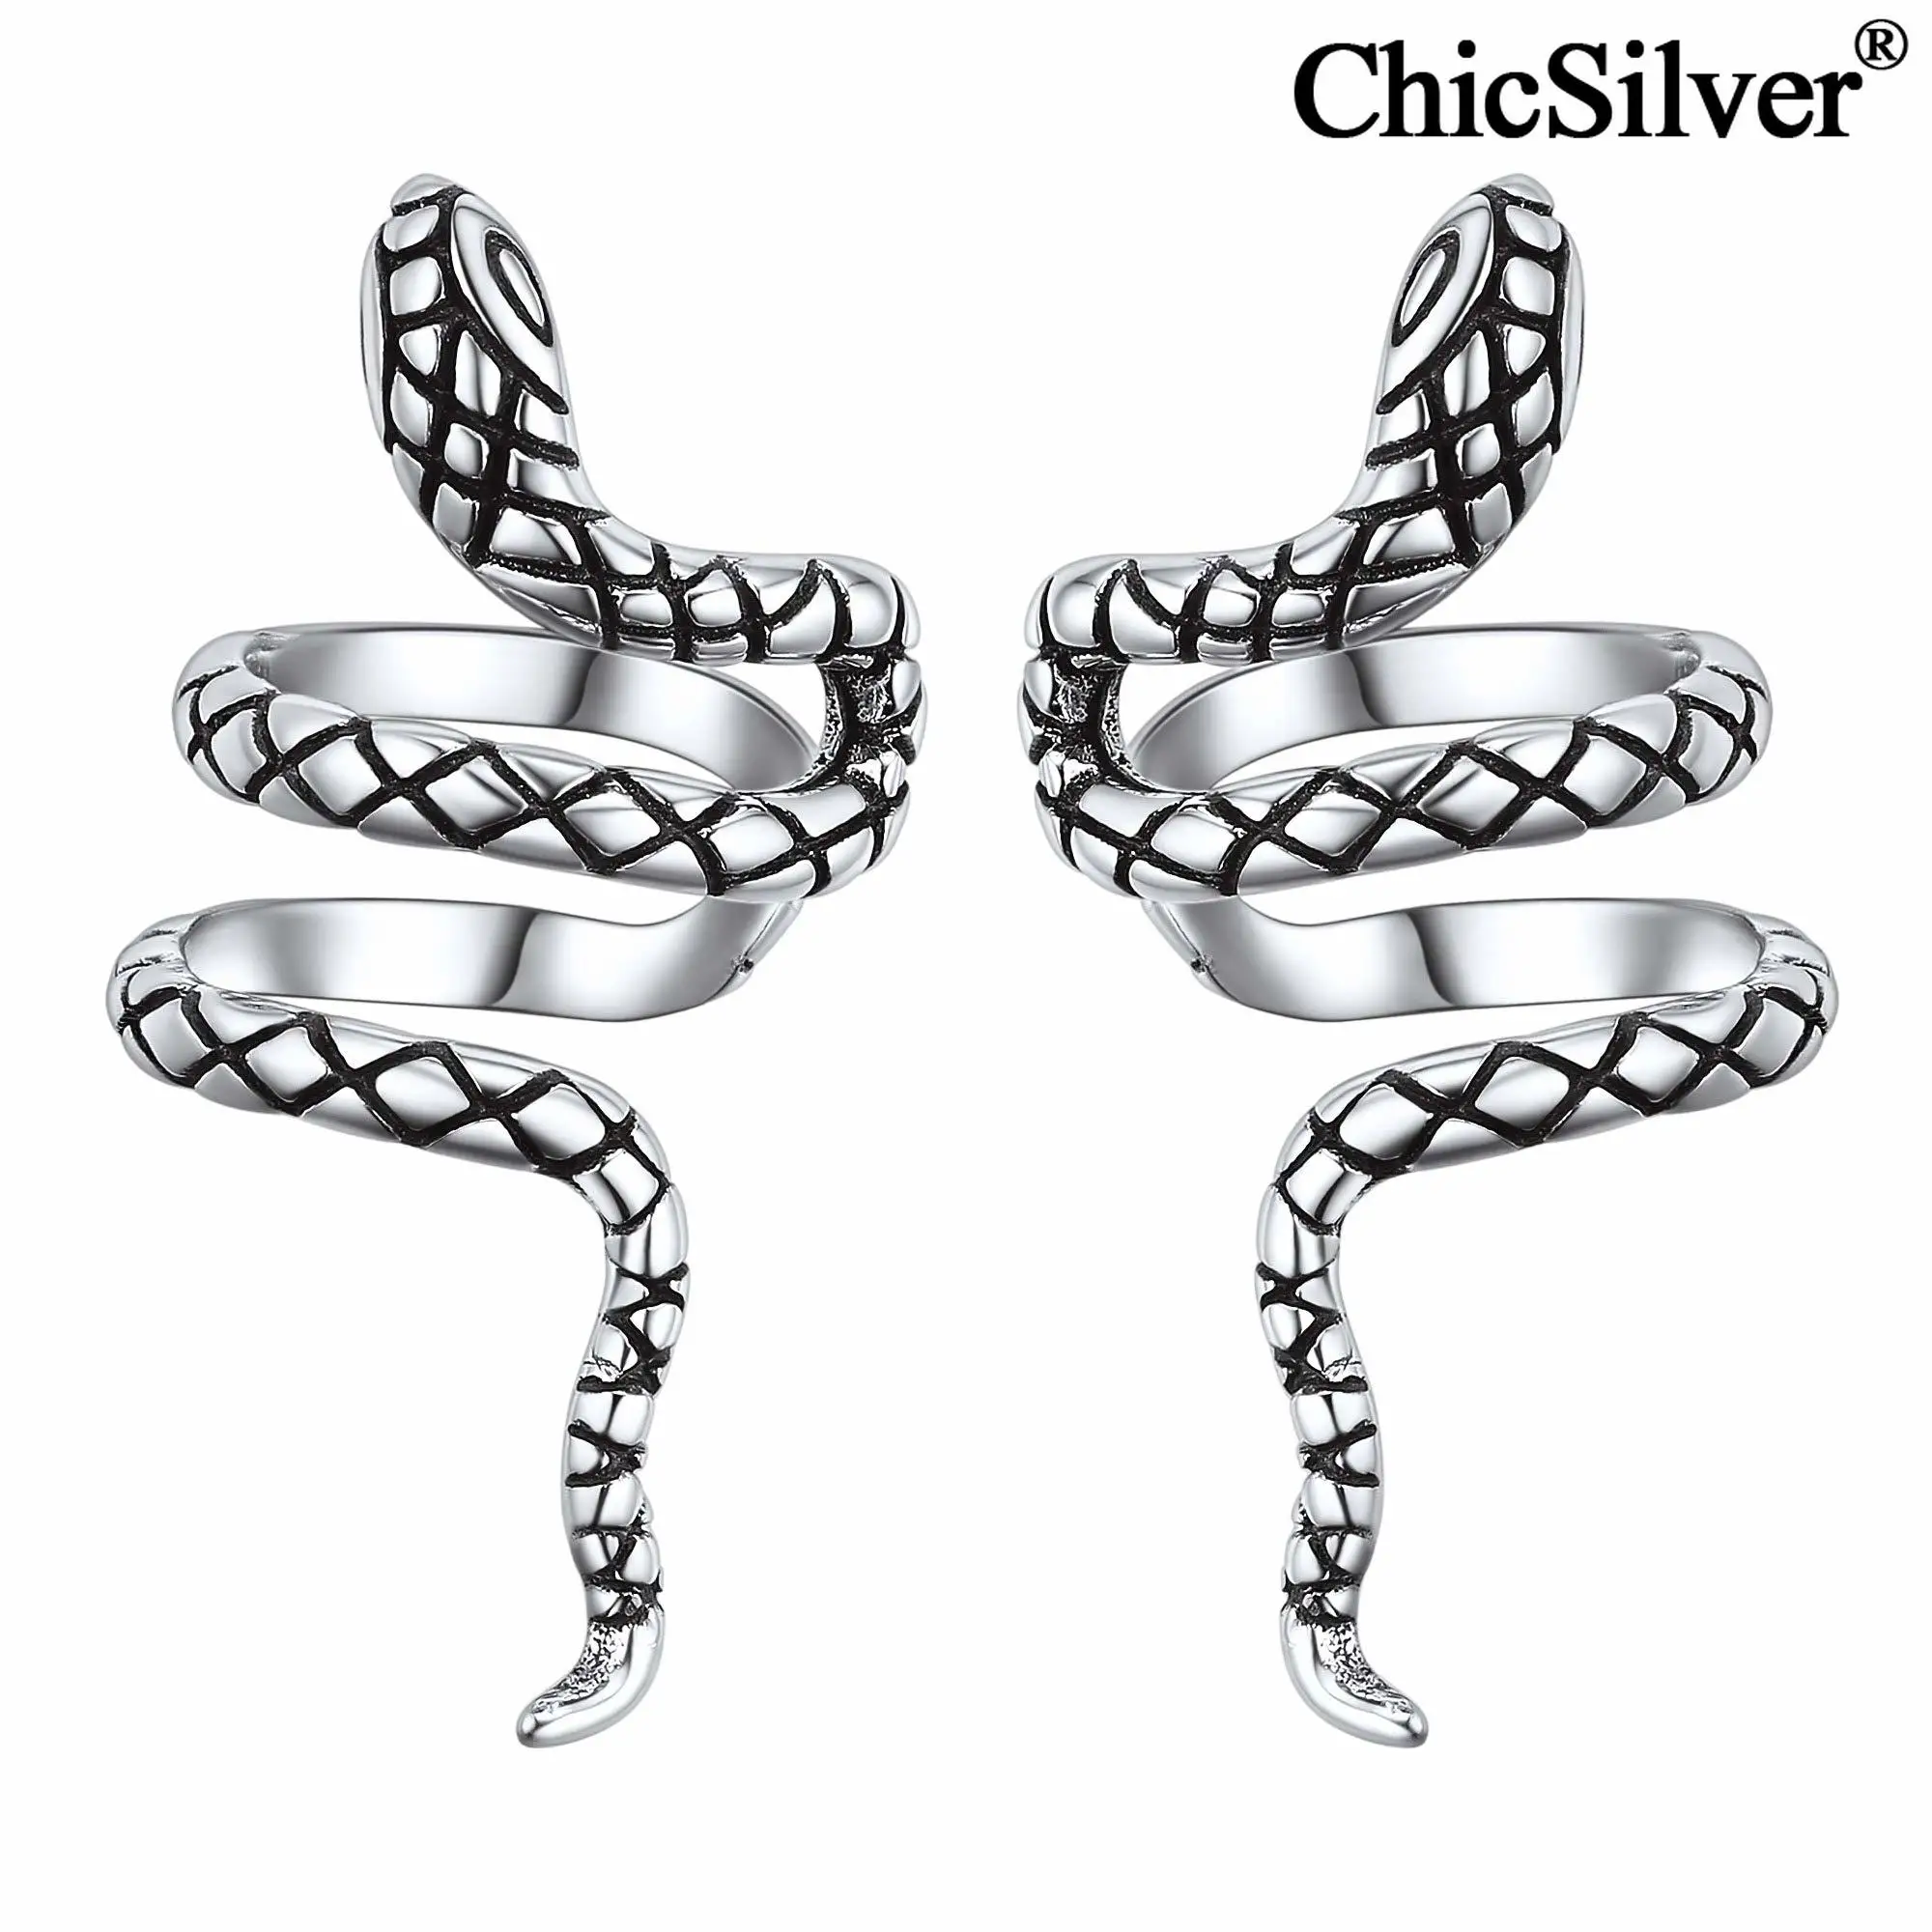 

ChicSilver 925 Sterling Silver Cartilage Ear Cuff Snake Climber Crawler Non Pierced Open Helix Clip On Earrings Gift for Women